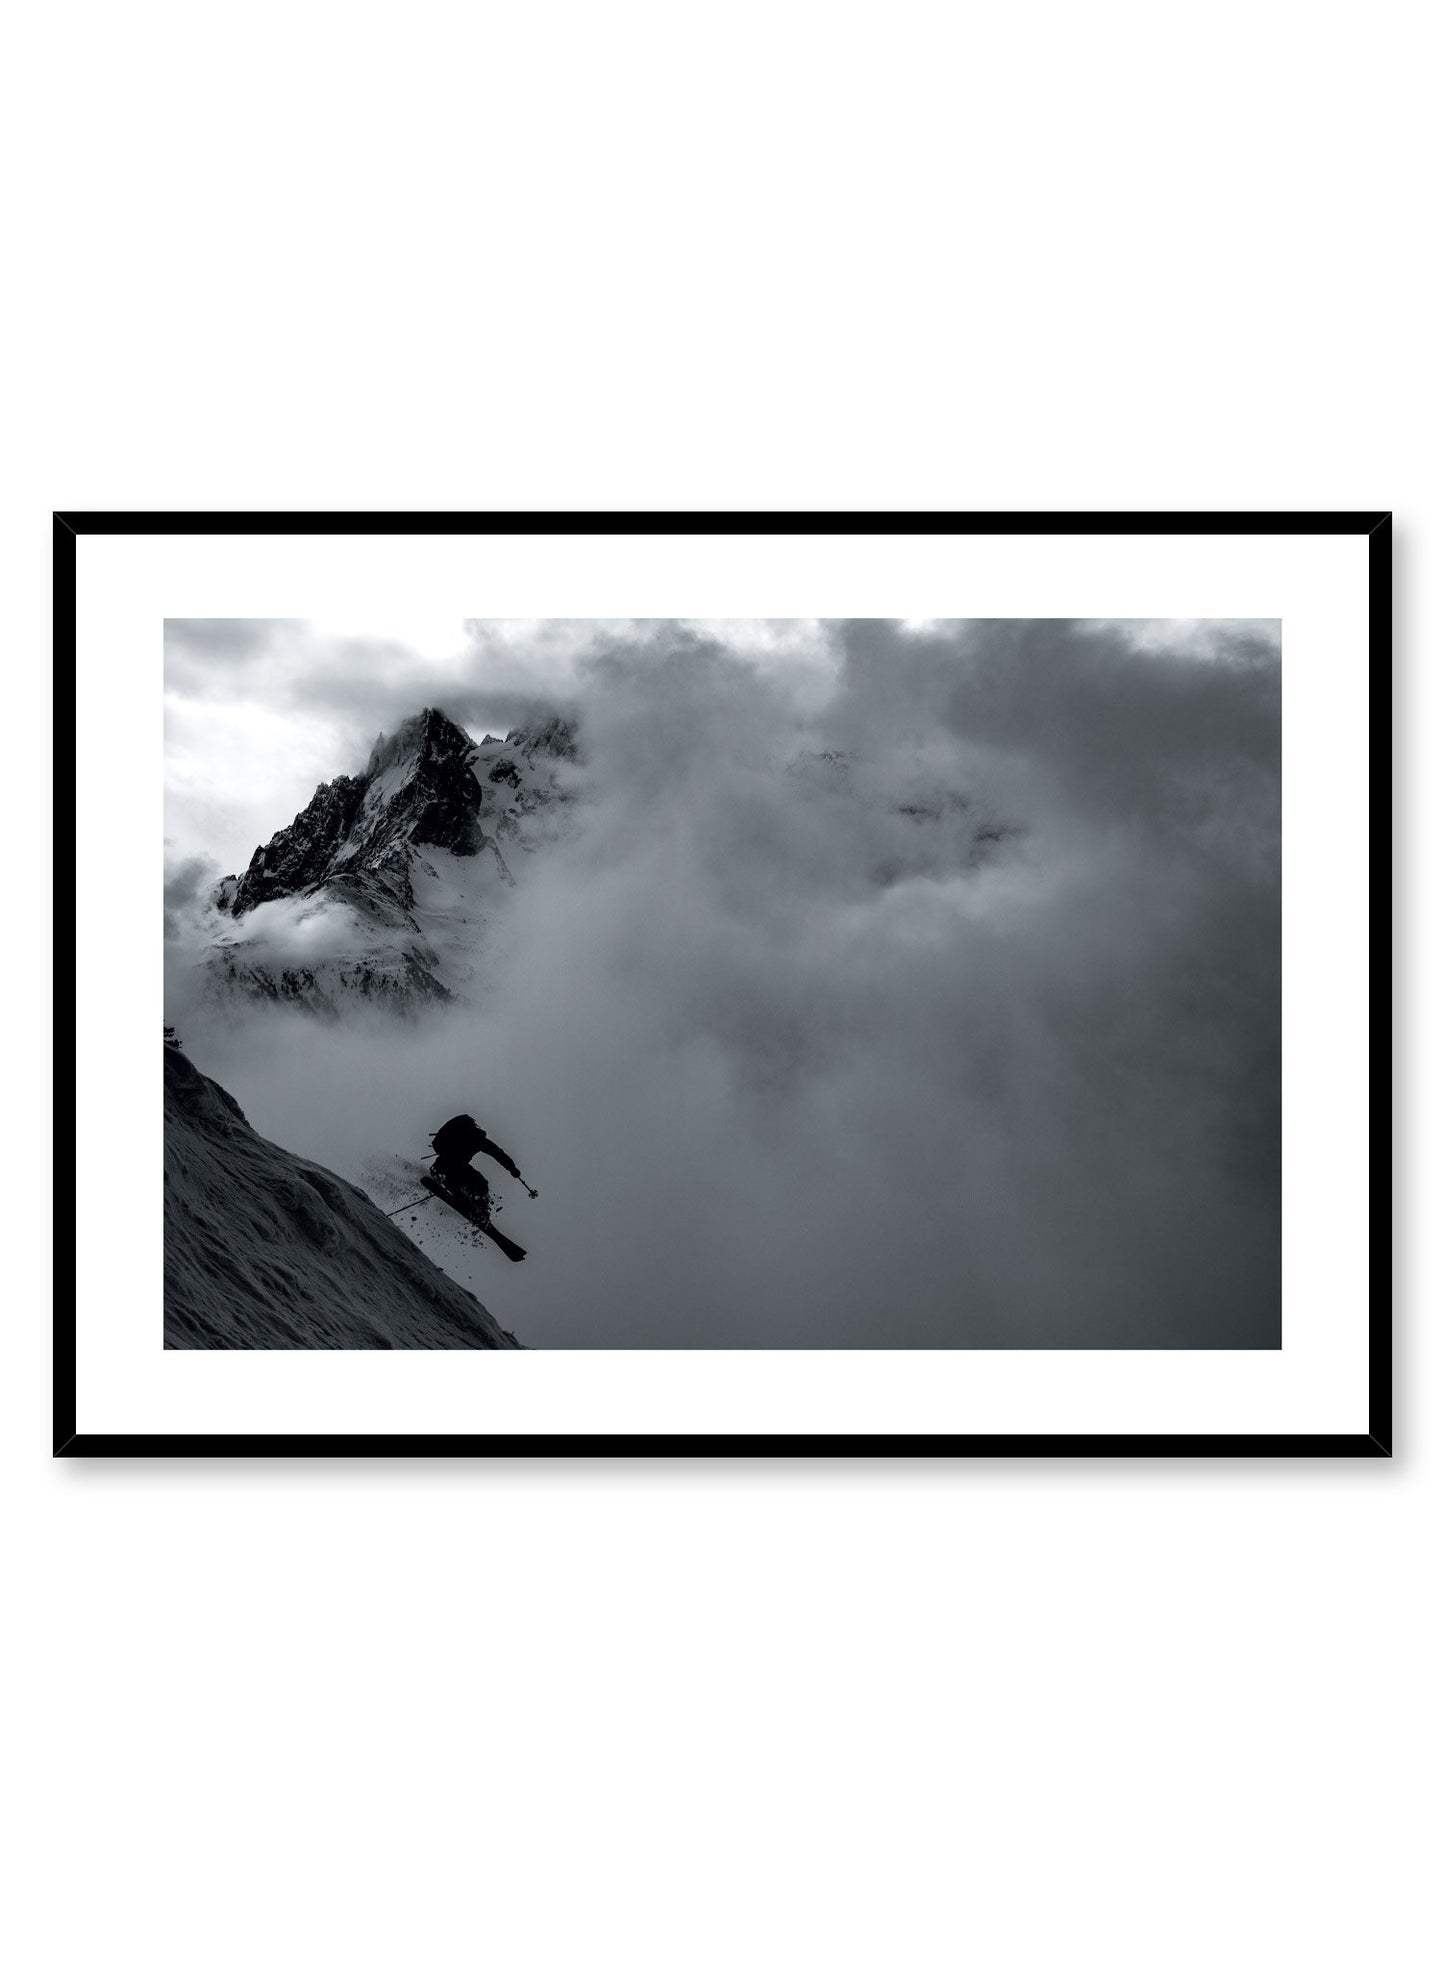 Landscape photography poster by Opposite Wall with adventure extreme skier on mountain